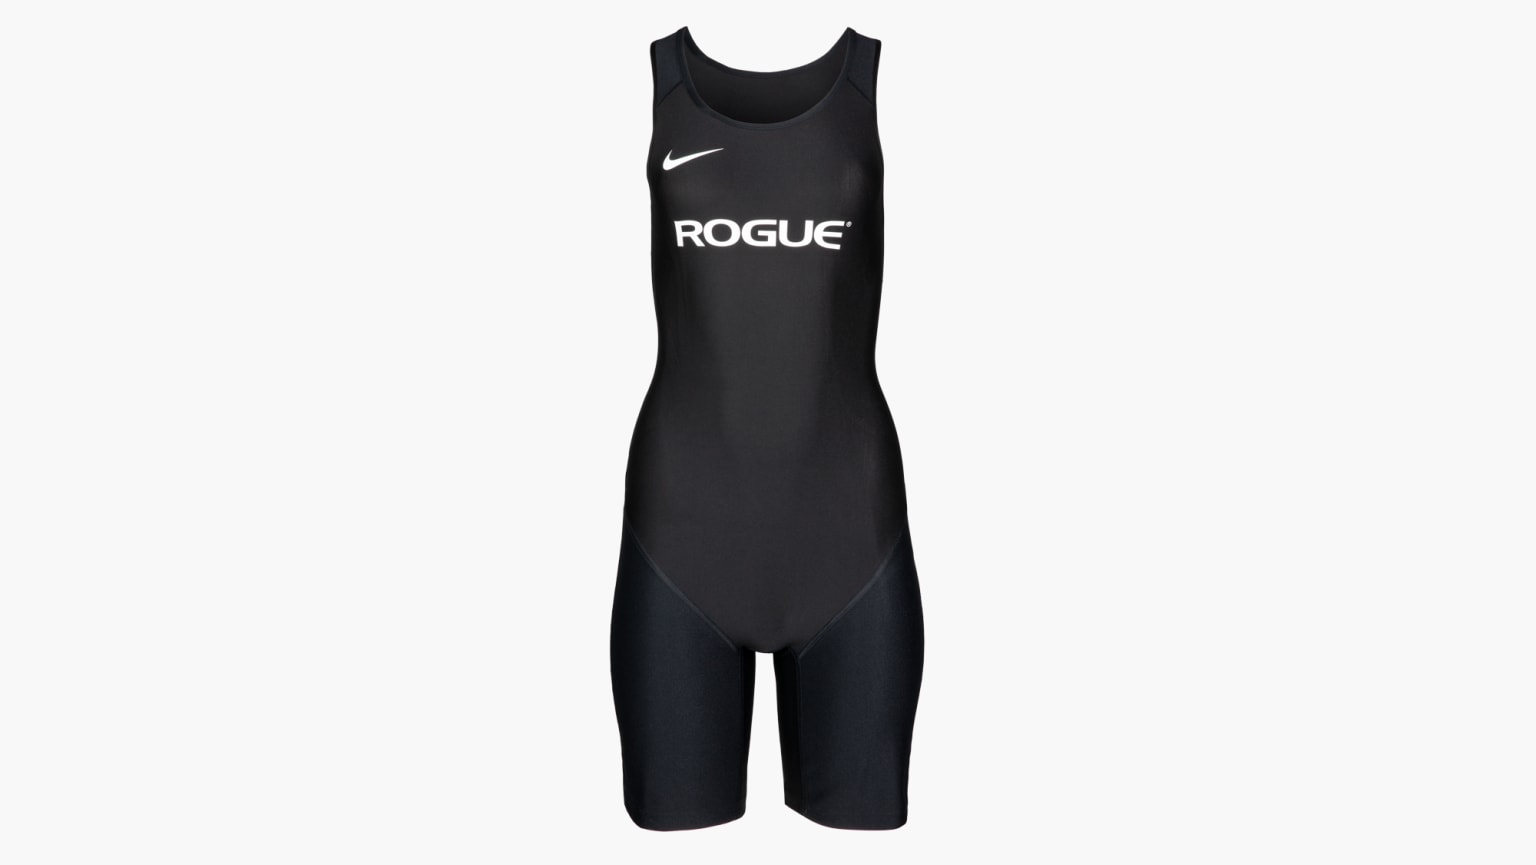 Irradiar Facturable Ideal Rogue Nike Women's Weightlifting Singlet - Black | Rogue Fitness Europe